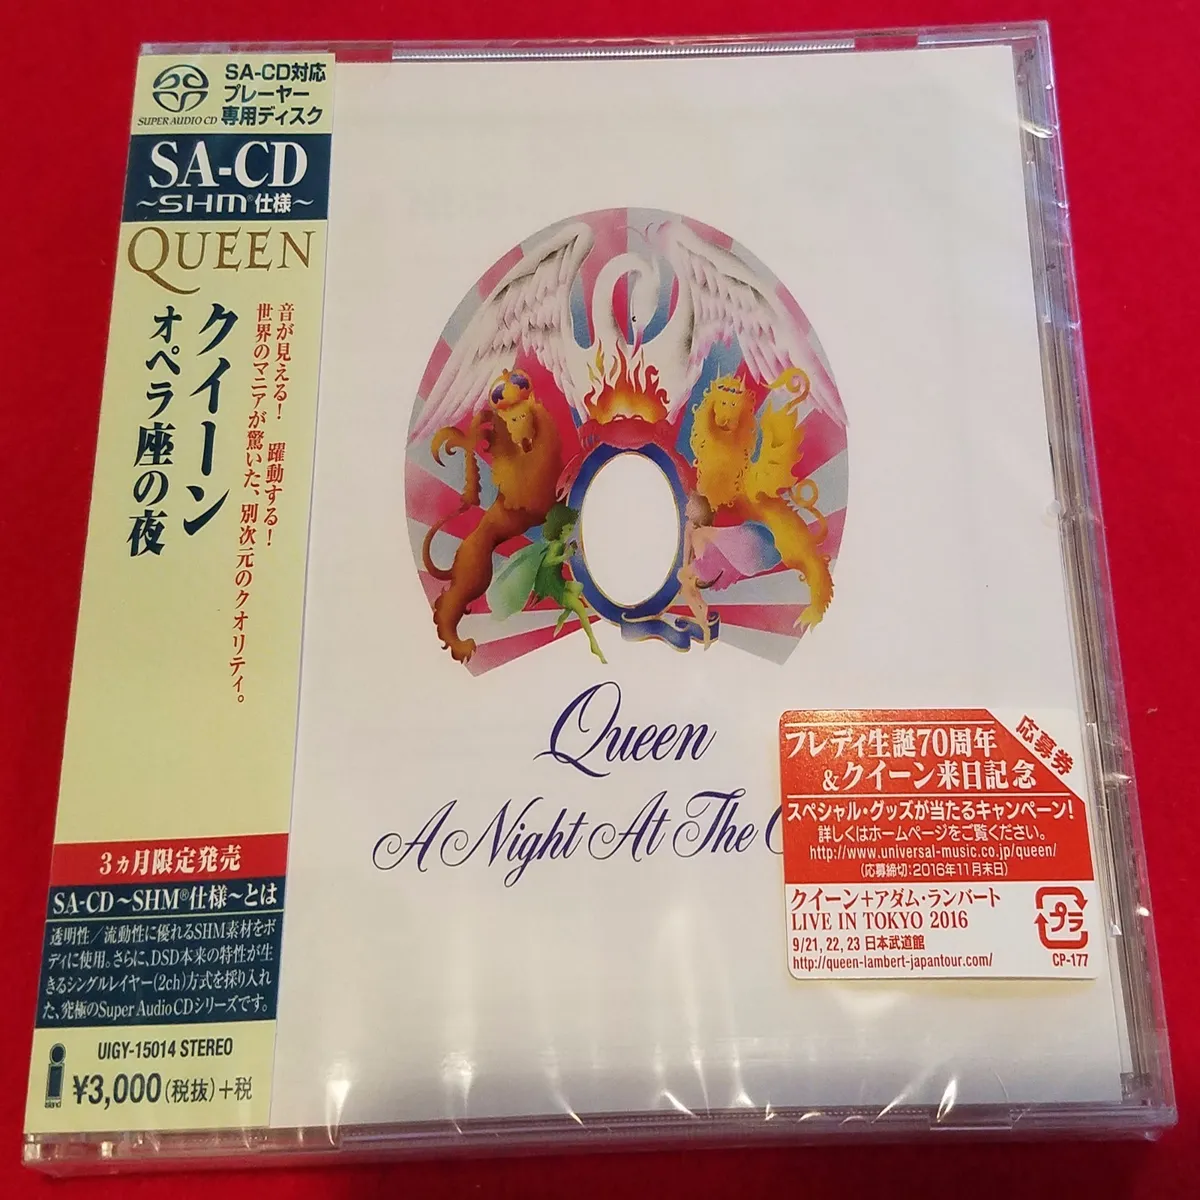 QUEEN - A Night At The Opera - Japan Jewel Case SACD-SHM - UIGY